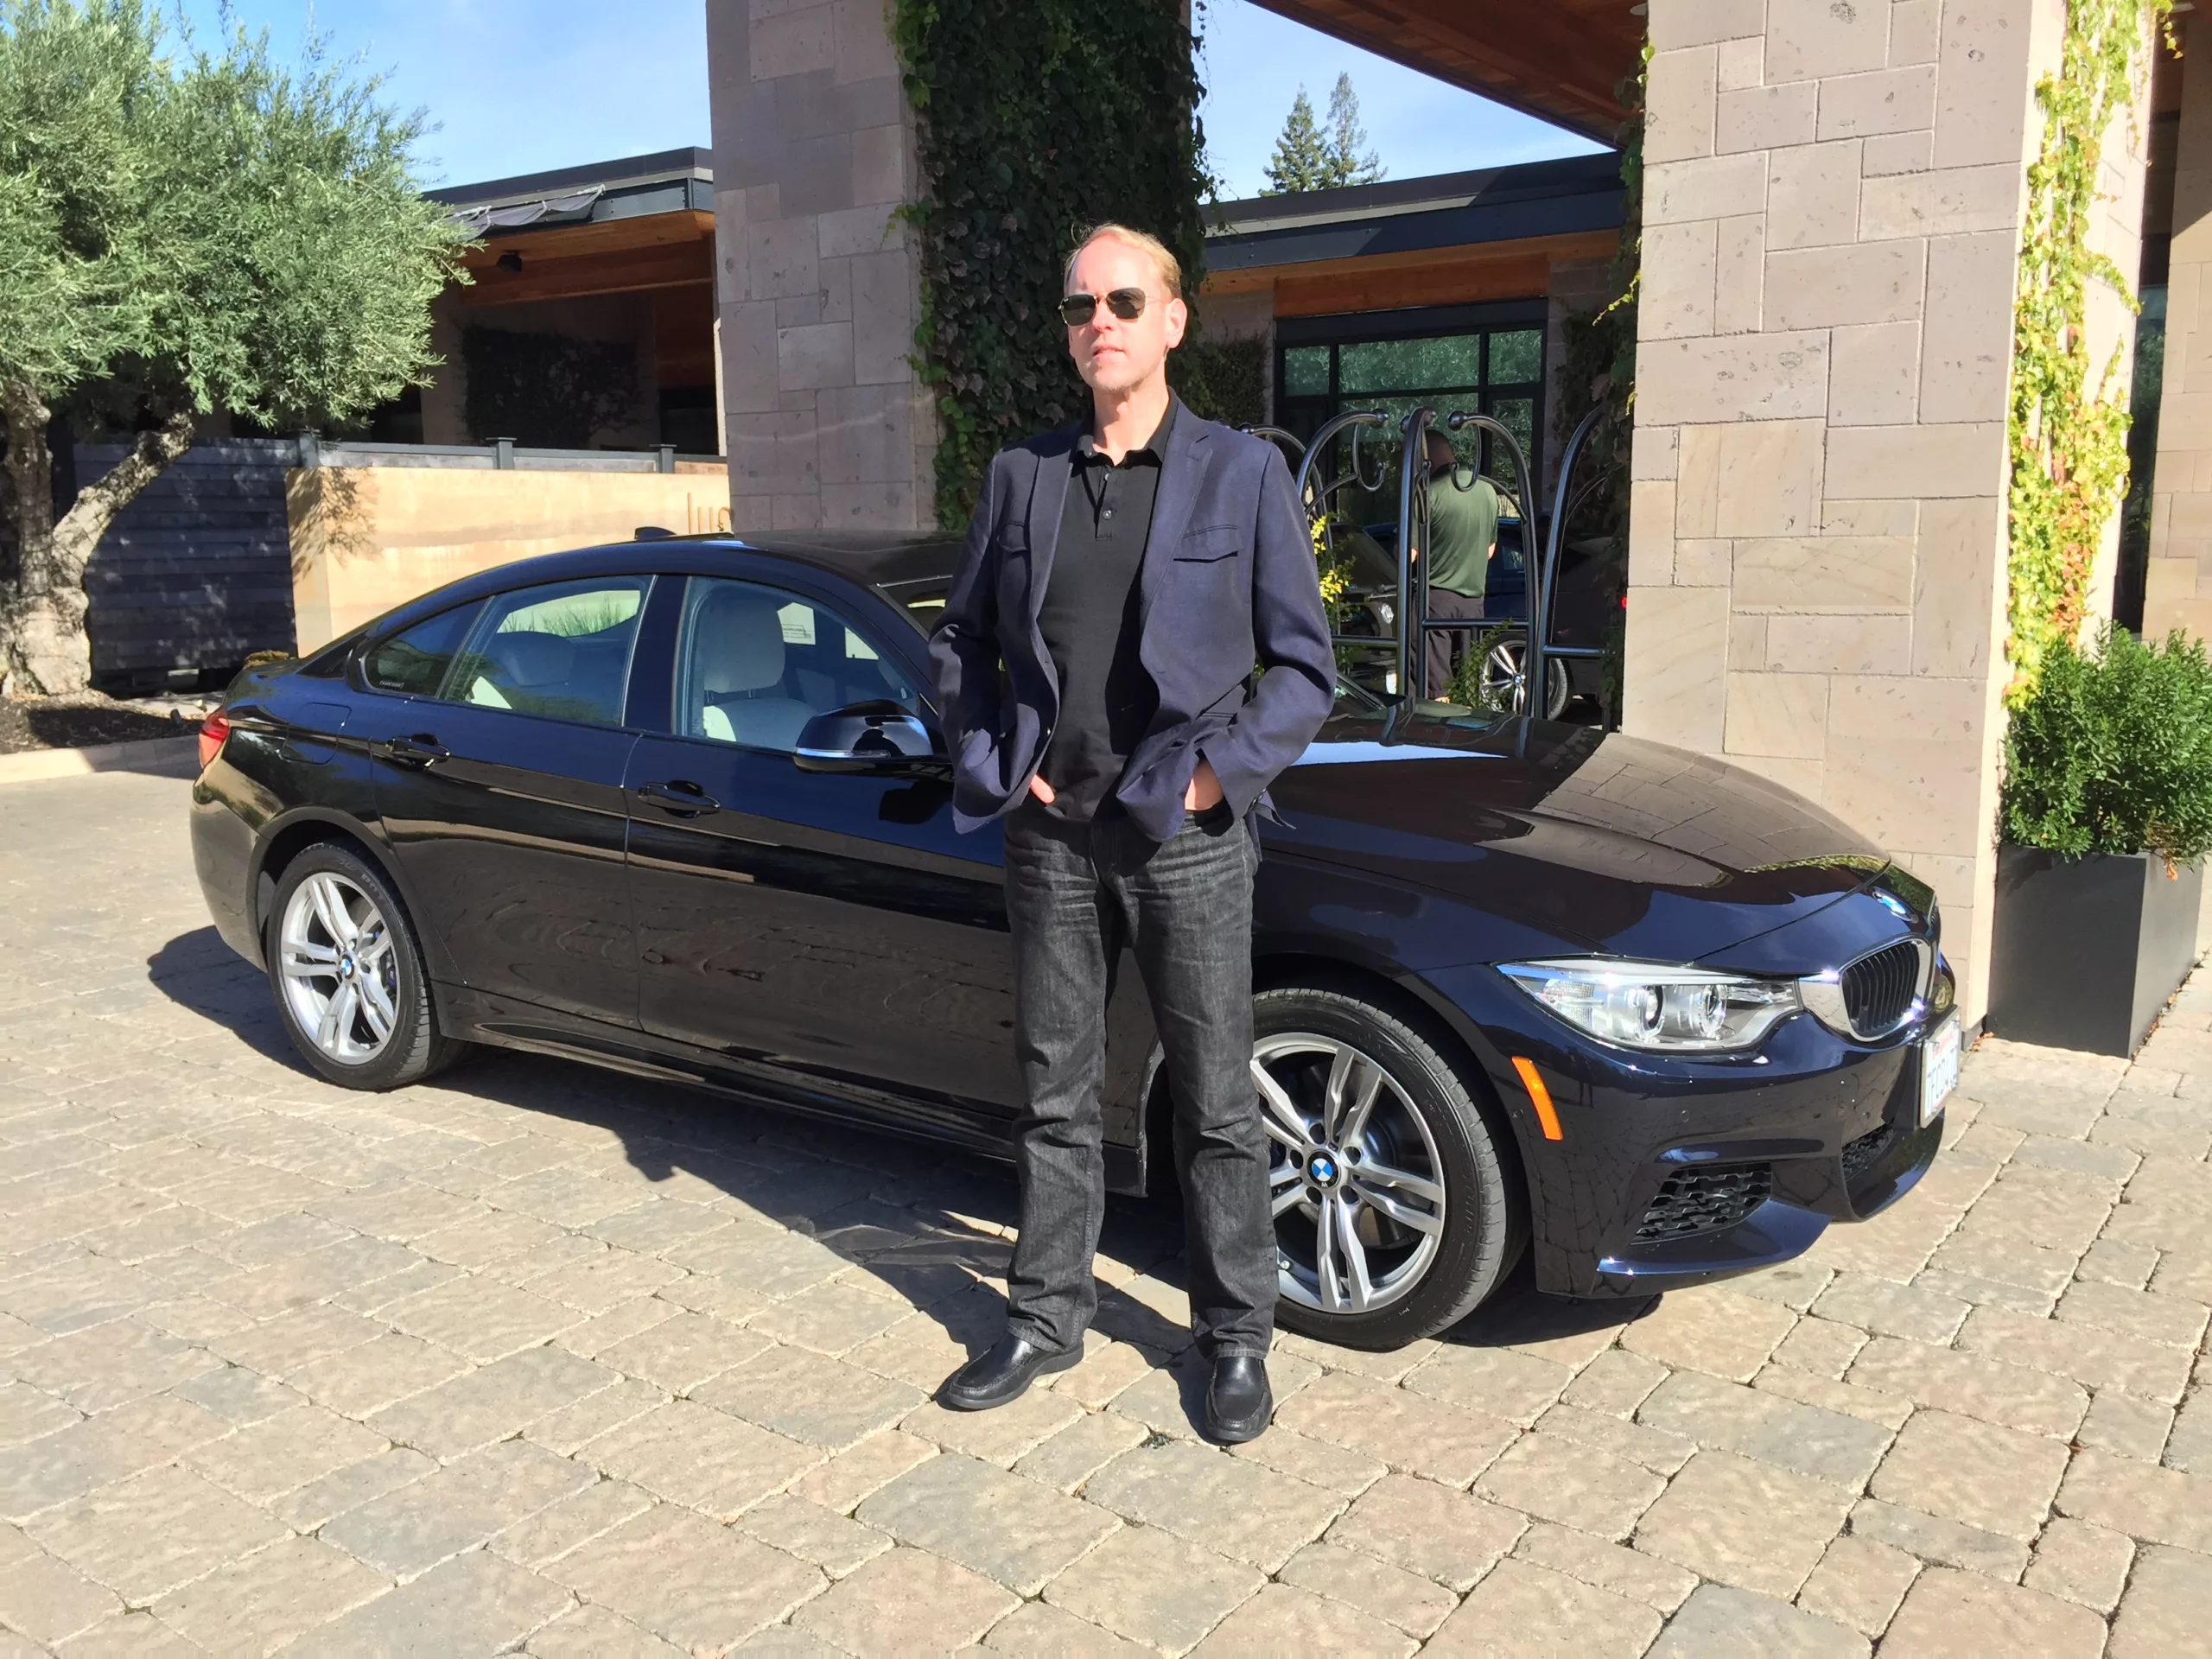 Pursuitist Editor In Chief exploring Napa in a BMW